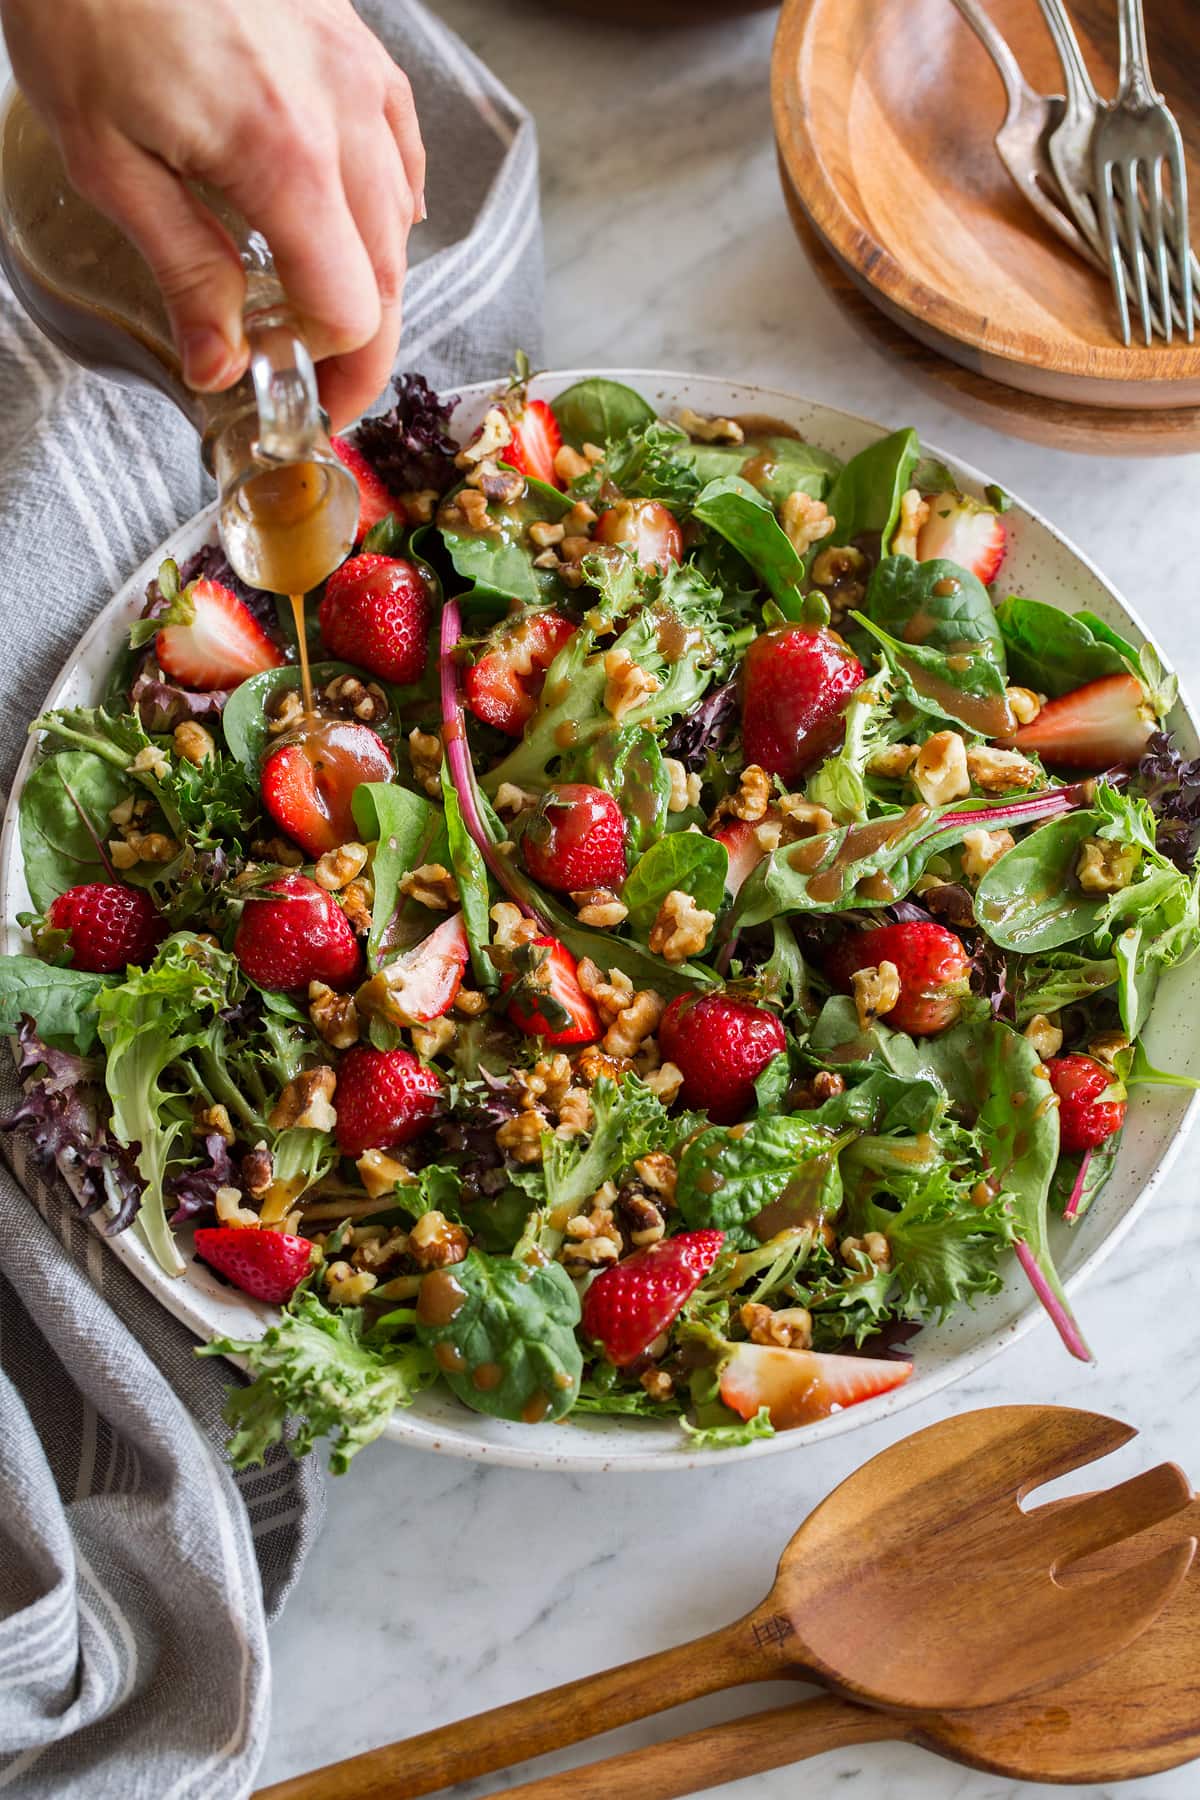 Green salad with strawberries and walnuts with balsamic vinaigrette being poured over.